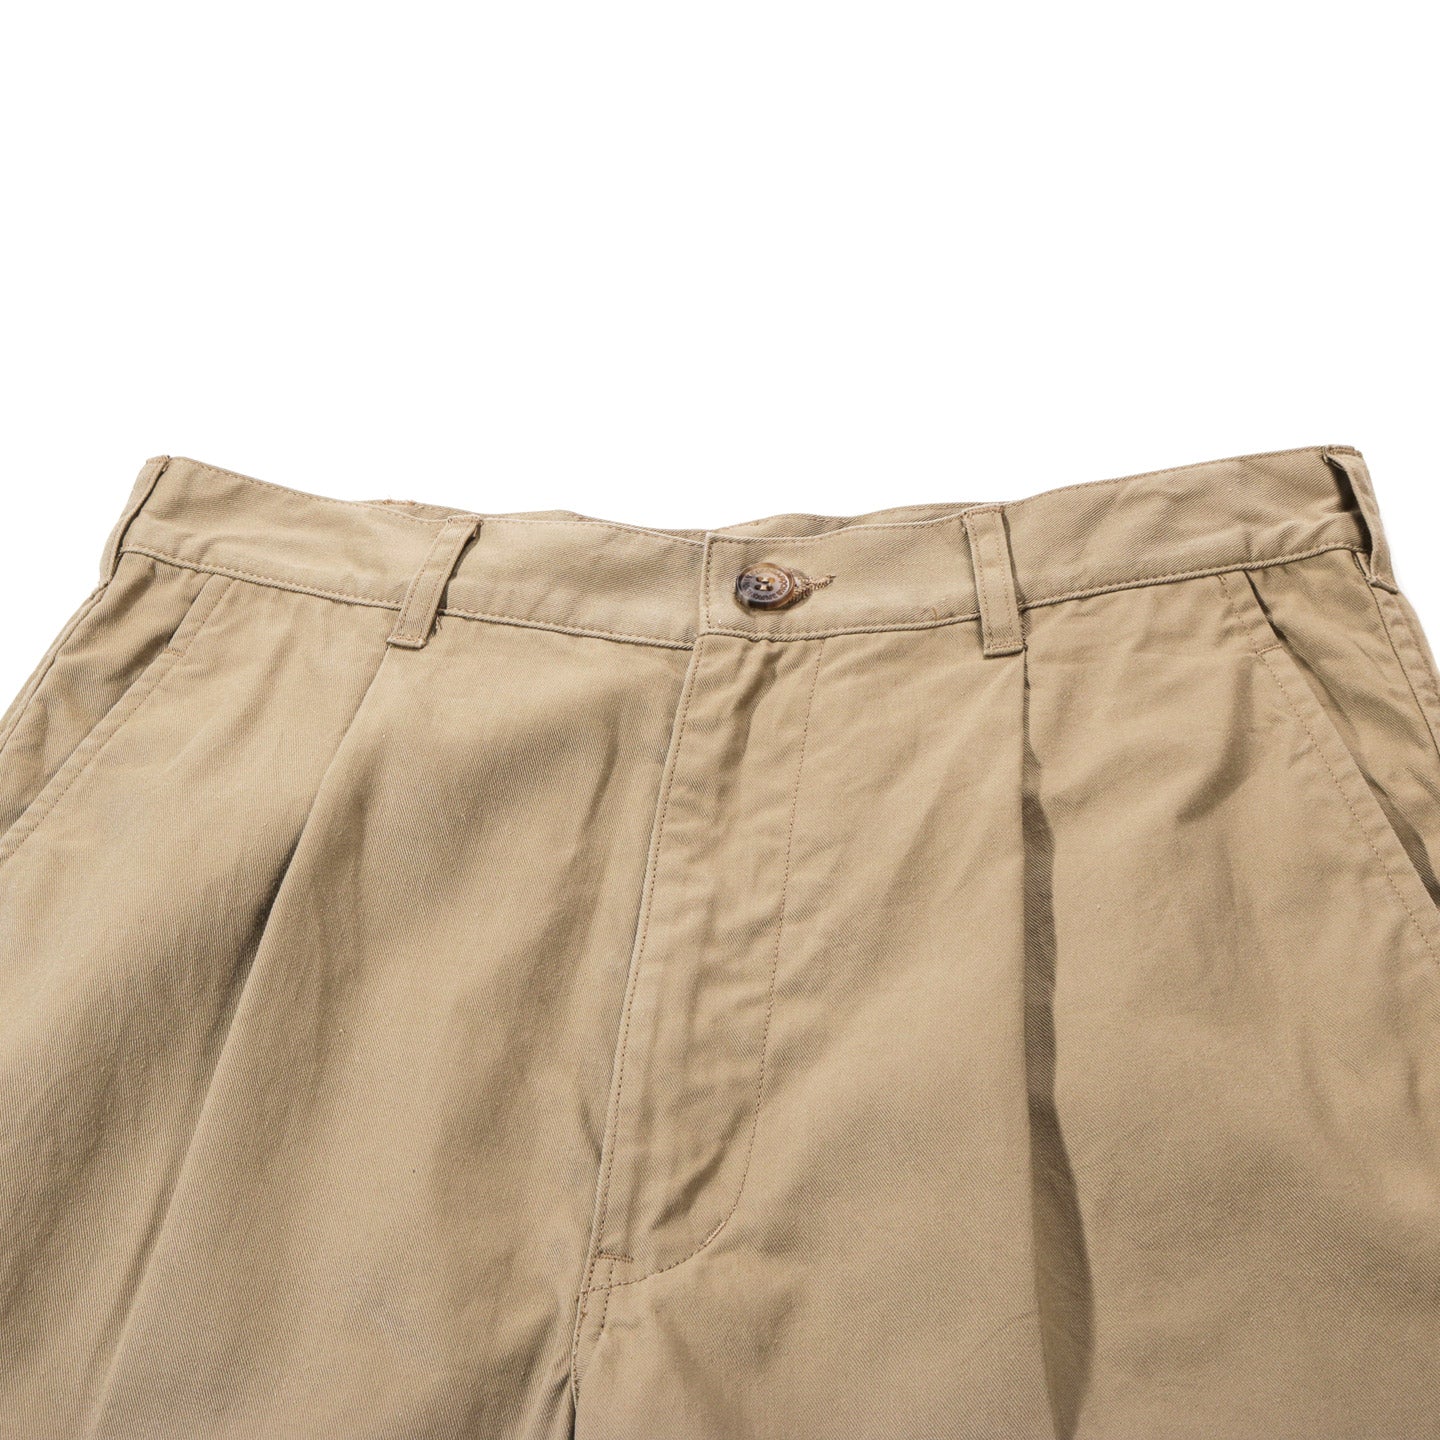 COMME DES GARCONS HOMME P028 PLEATED CHINO BEIGE